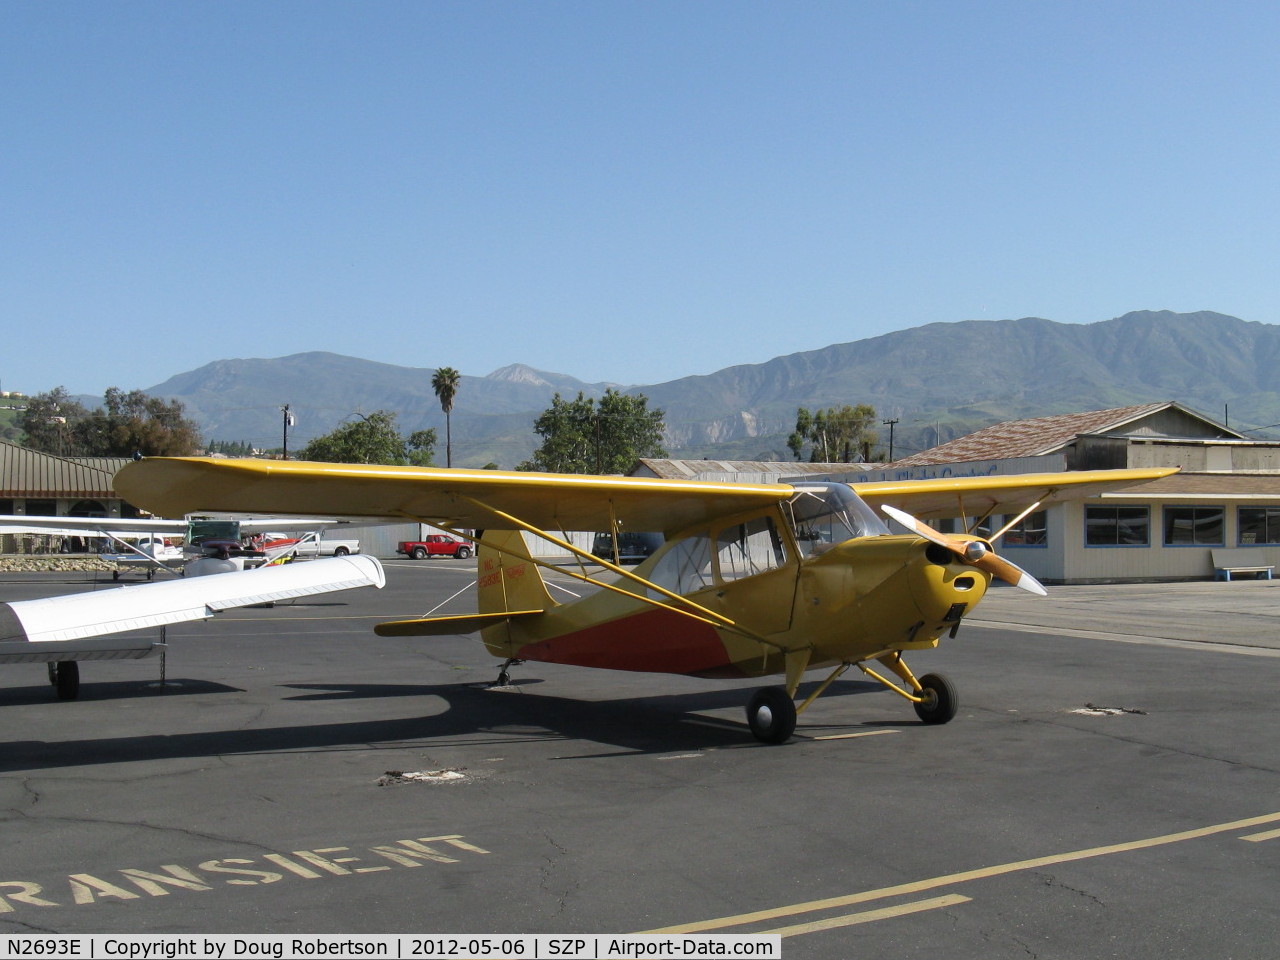 N2693E, 1946 Champion 7CCM C/N 7AC-6273, 1946 Aeronca 7CCM CHAMPION conversion from 7AC, Continental C90 90 Hp. The 7CCM was produced first in 1948 with larger tail fin, C90 and other structural changes.